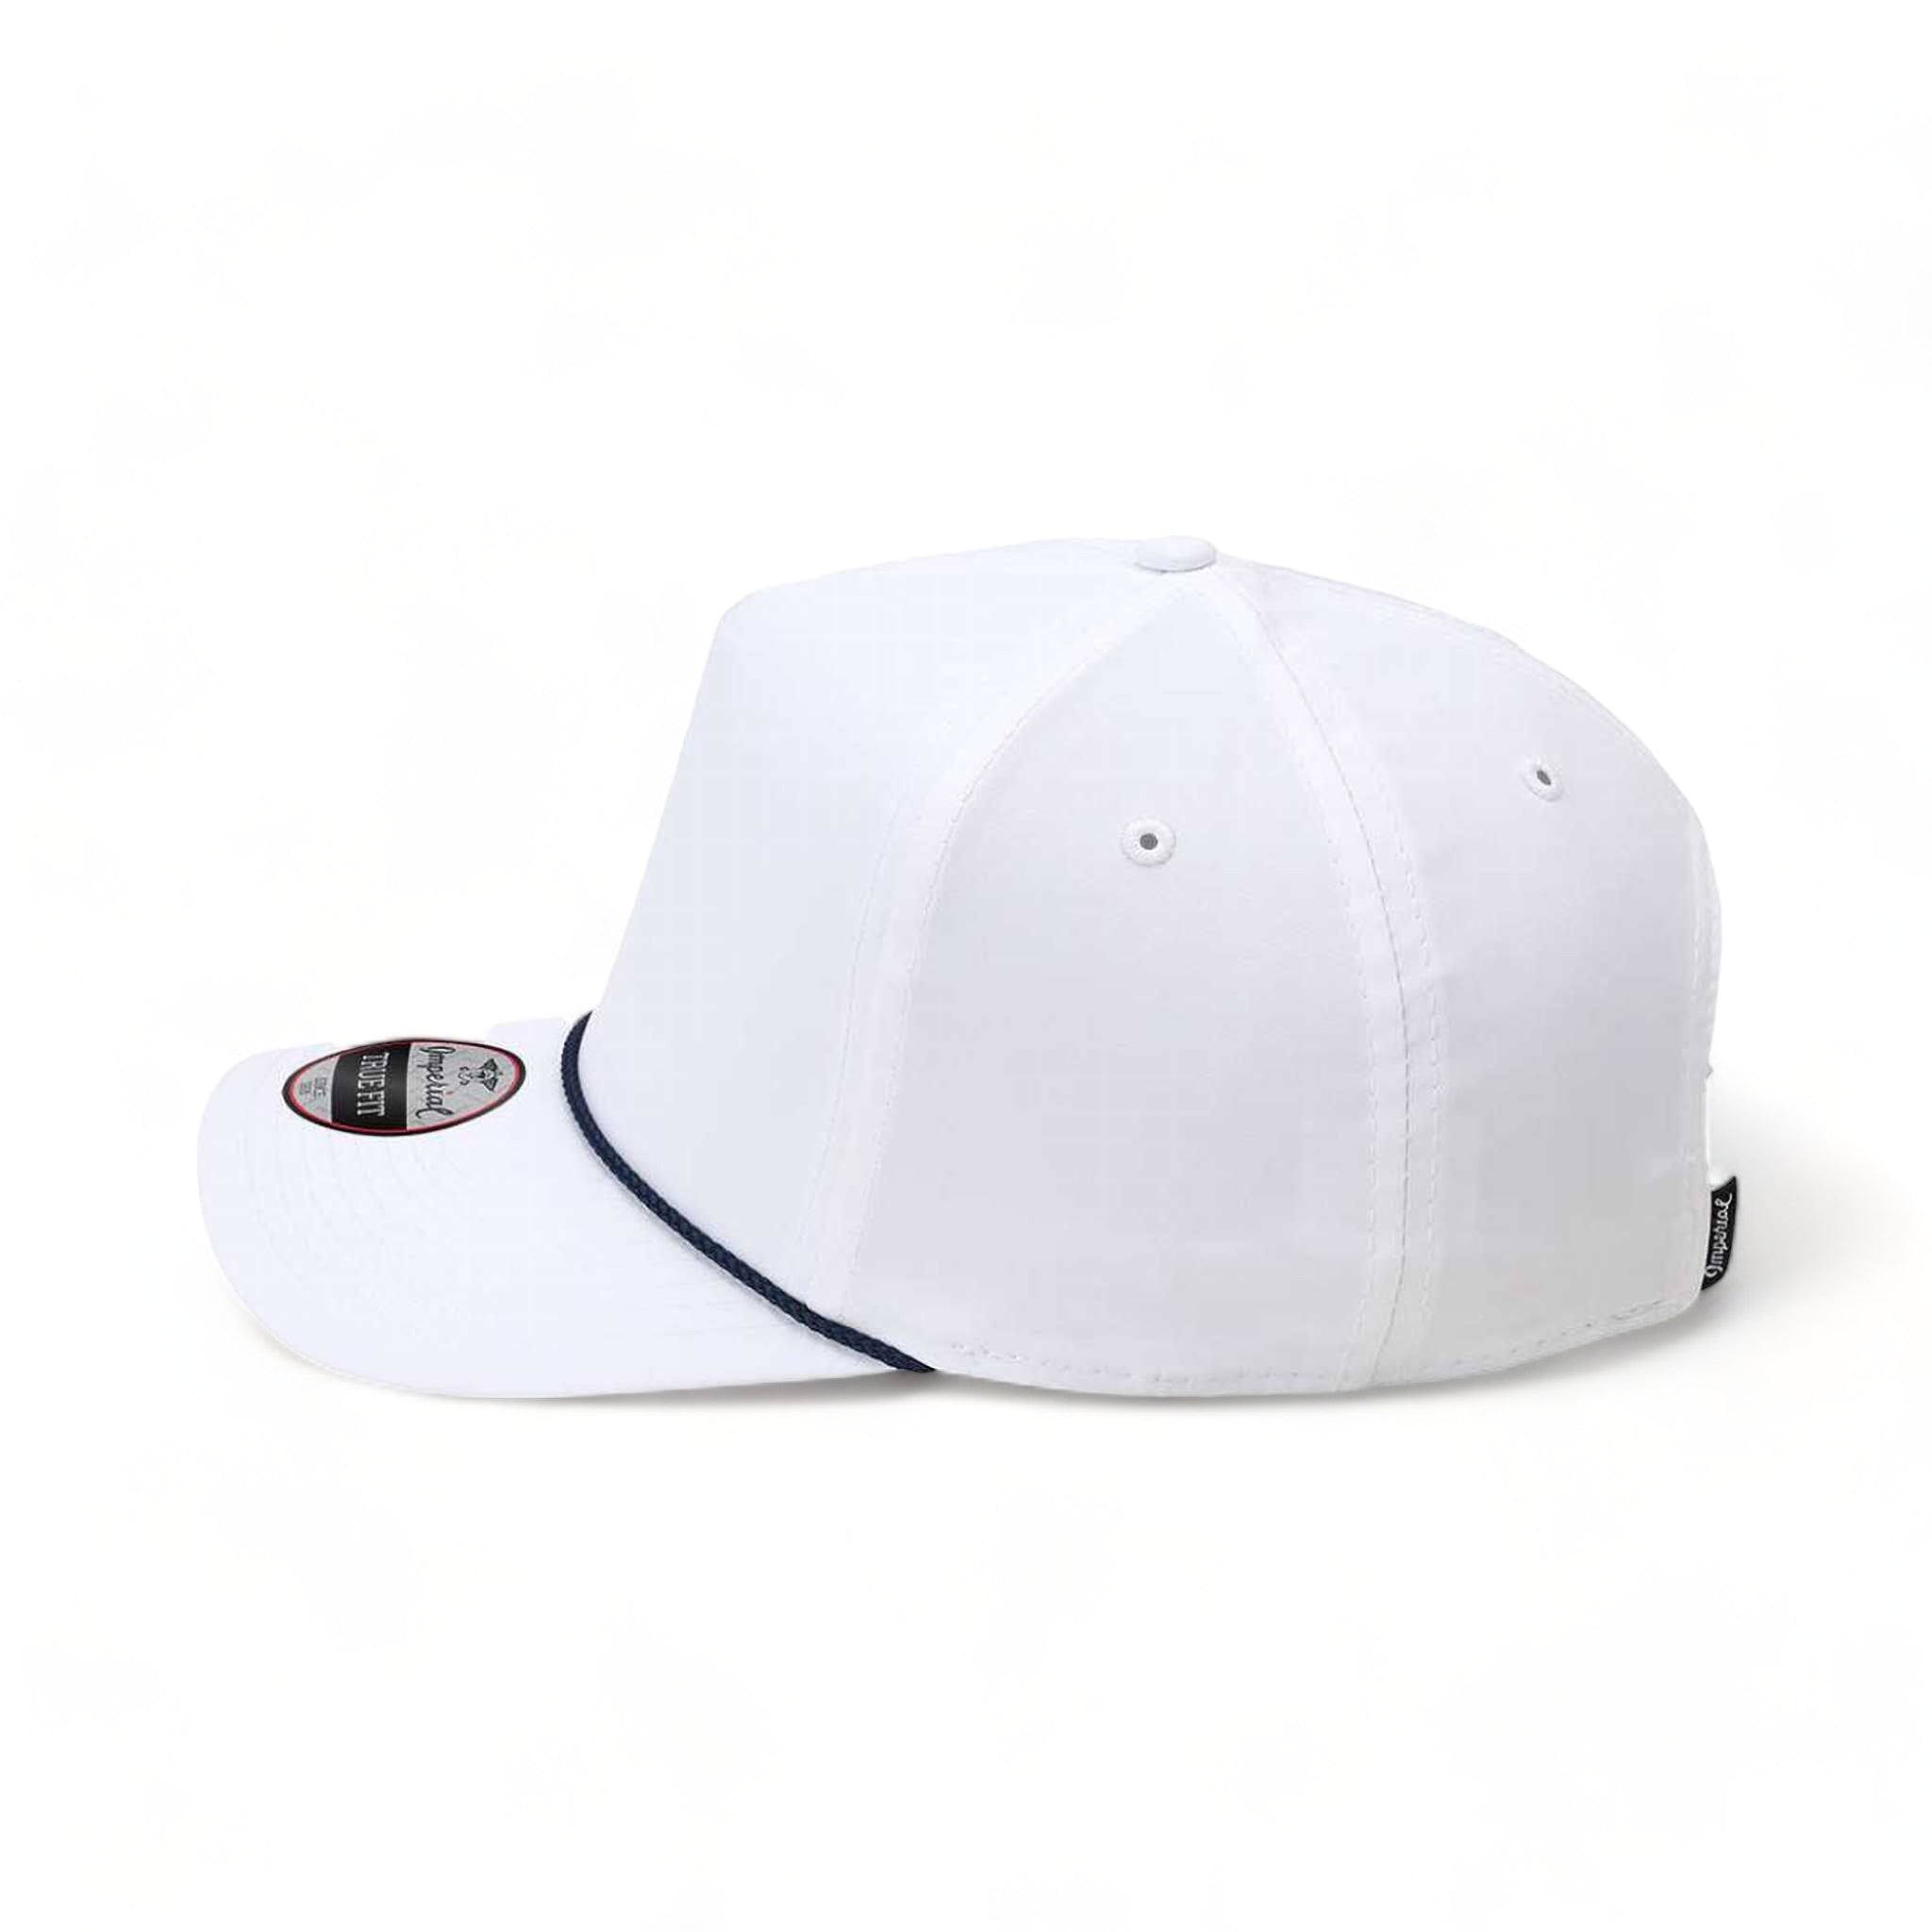 Side view of Imperial 5054 custom hat in white and navy